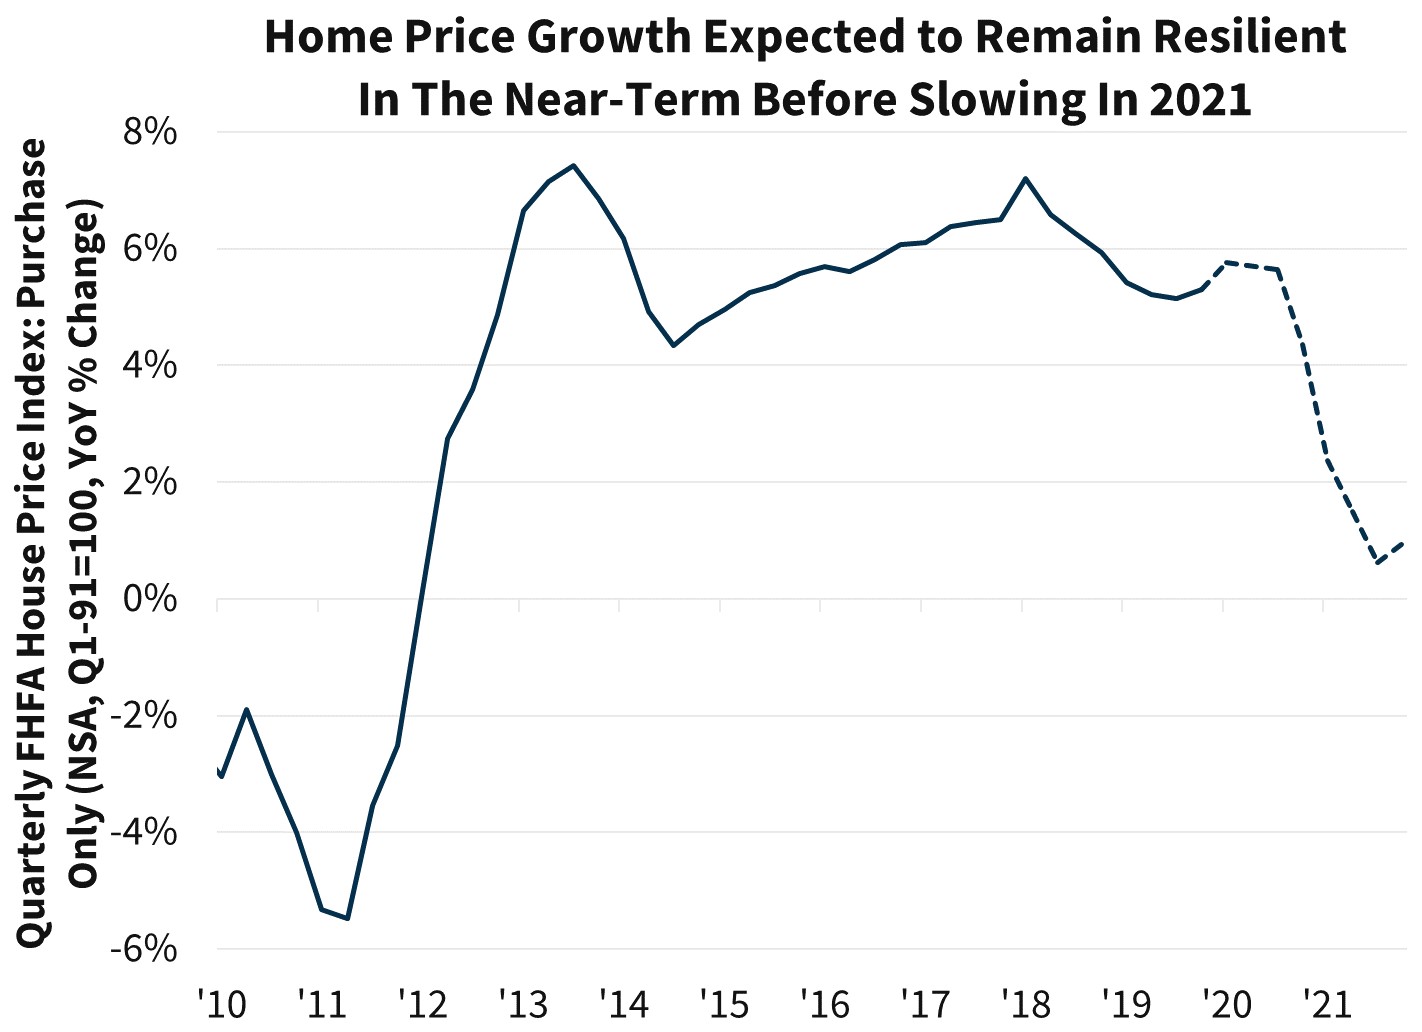 Home Price Growth Expected to Remain Resilient in the Near-Term Before Slowing in 2021